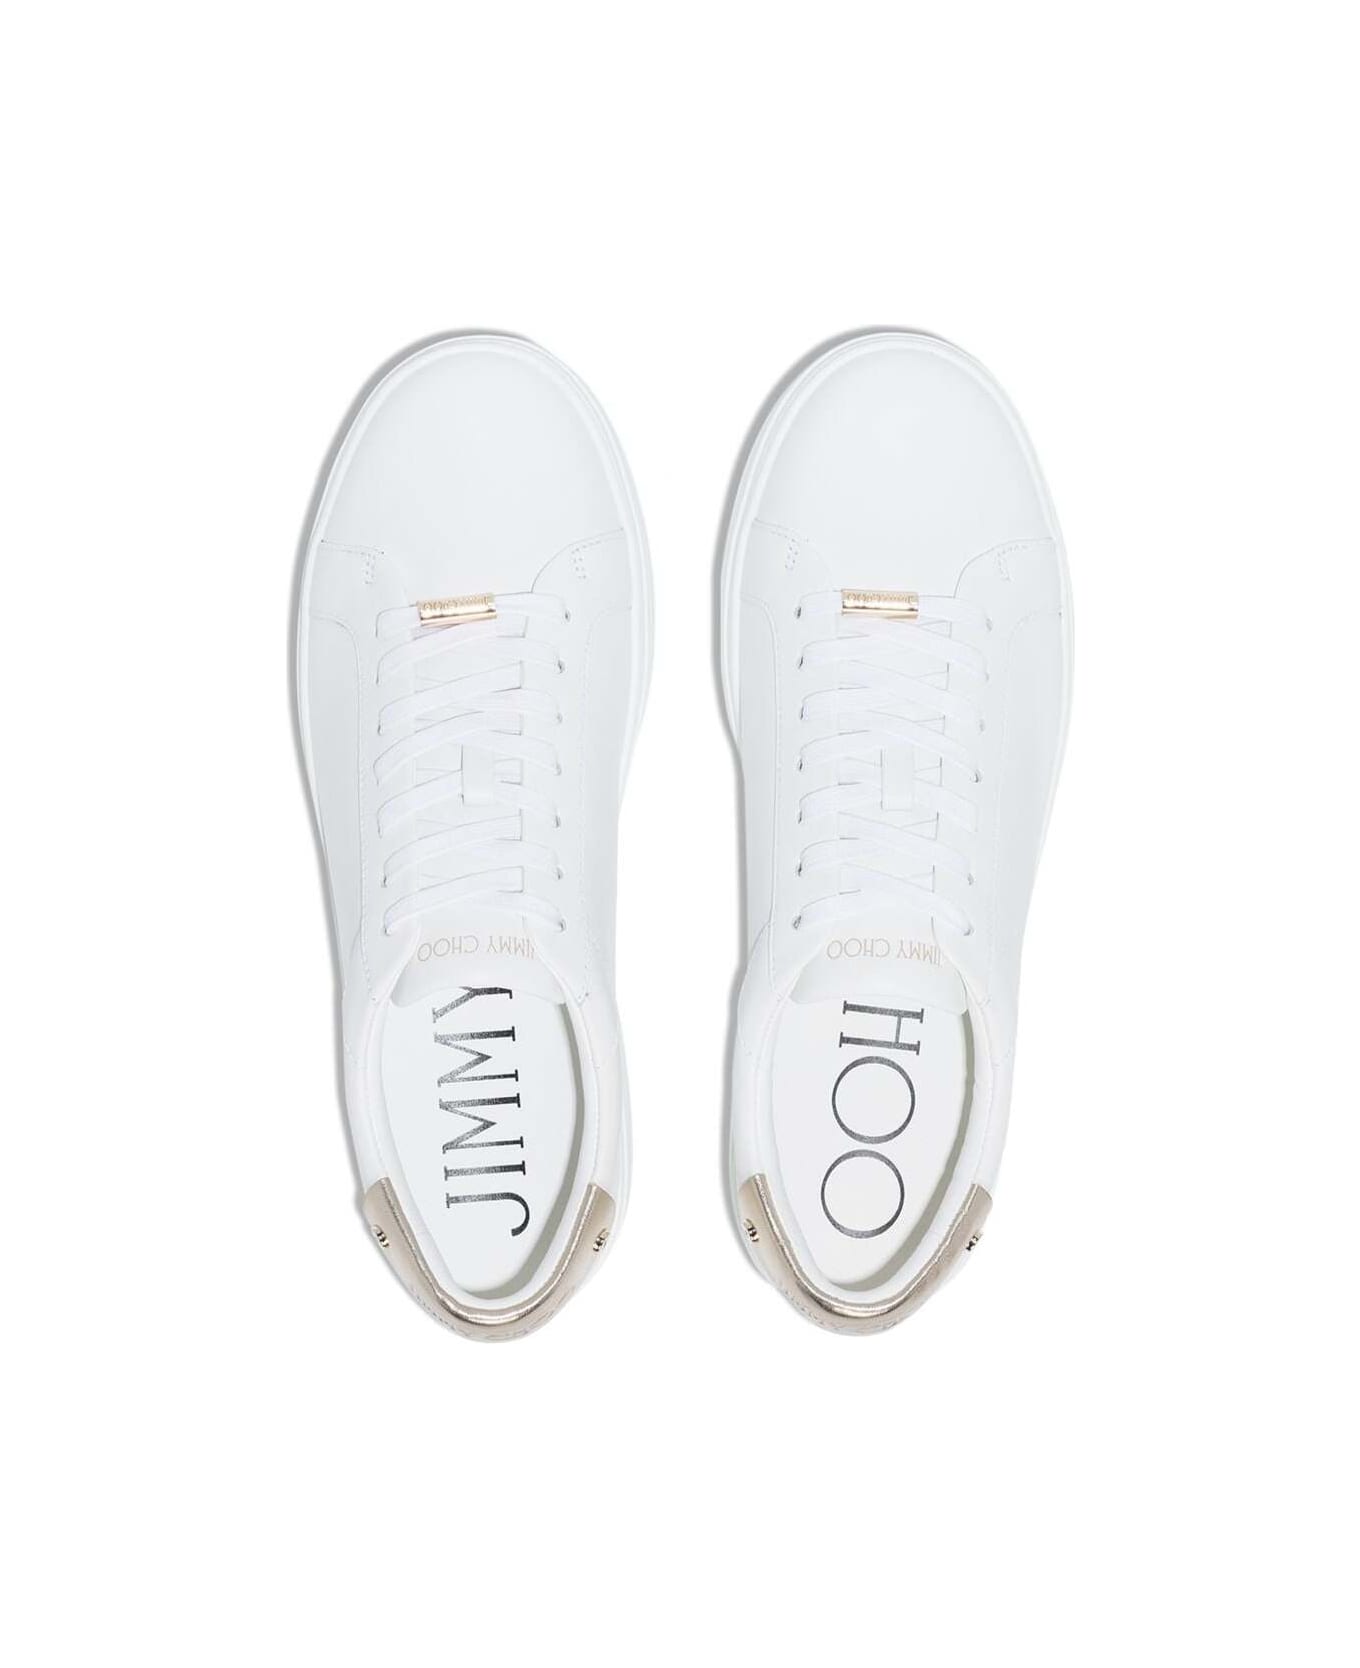 Jimmy Choo Woman's Rome White Leather Sneakers - White